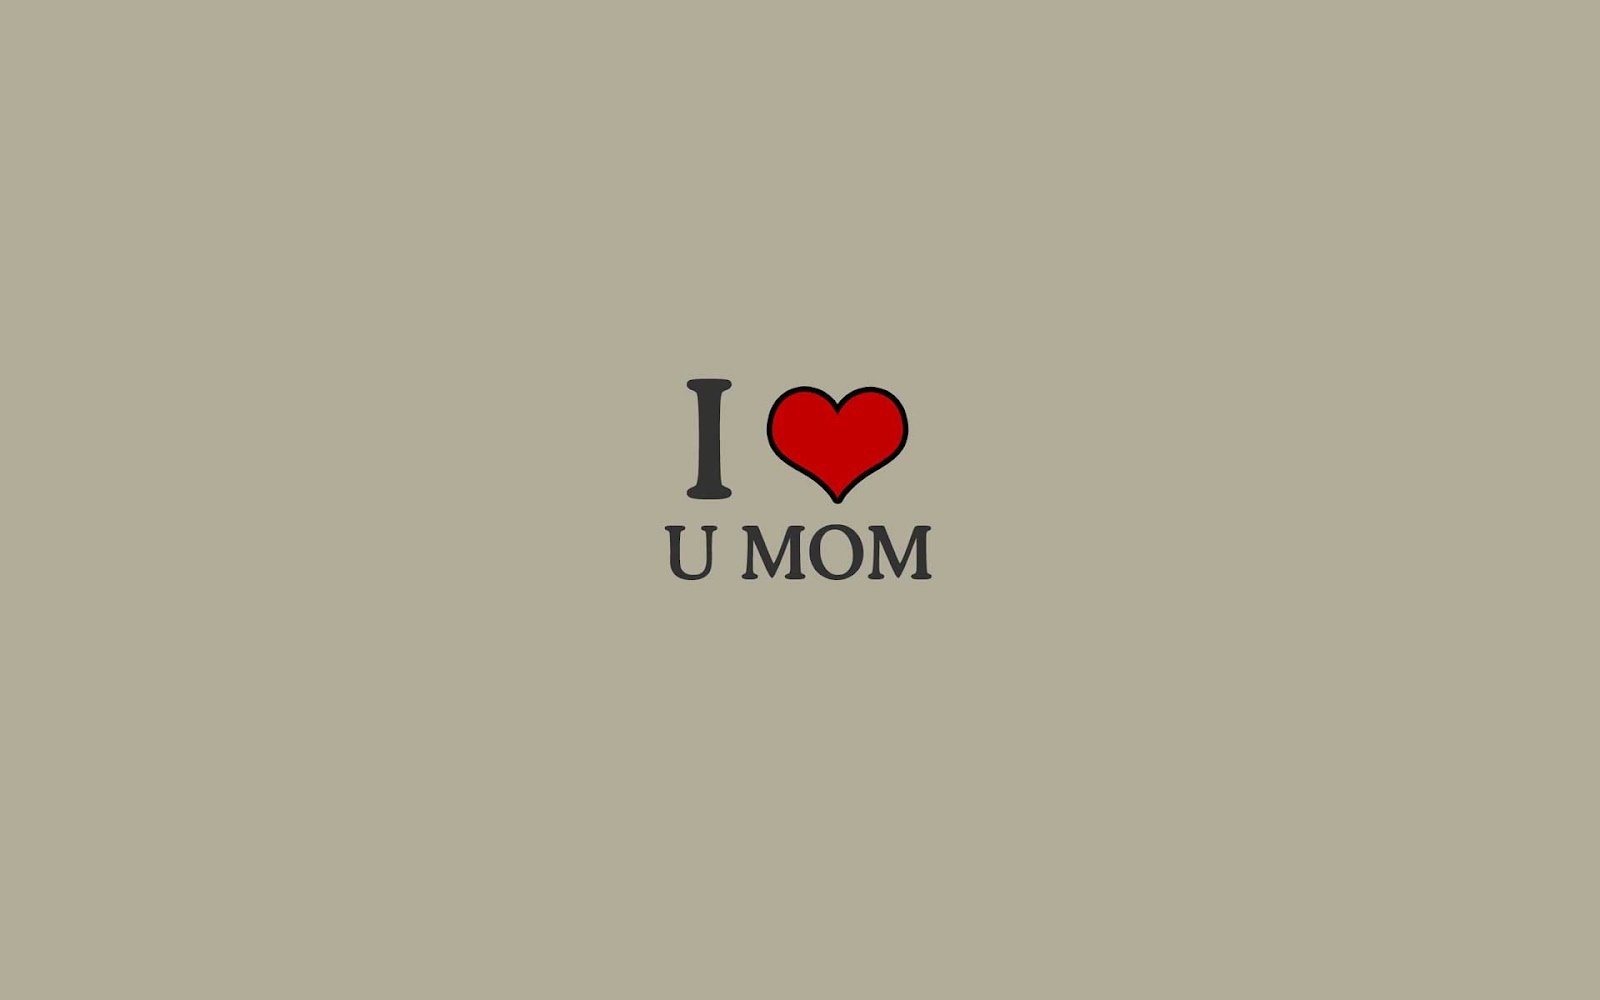 I Love Mom Wallpapers Images amp Pictures   Becuo 1600x1000